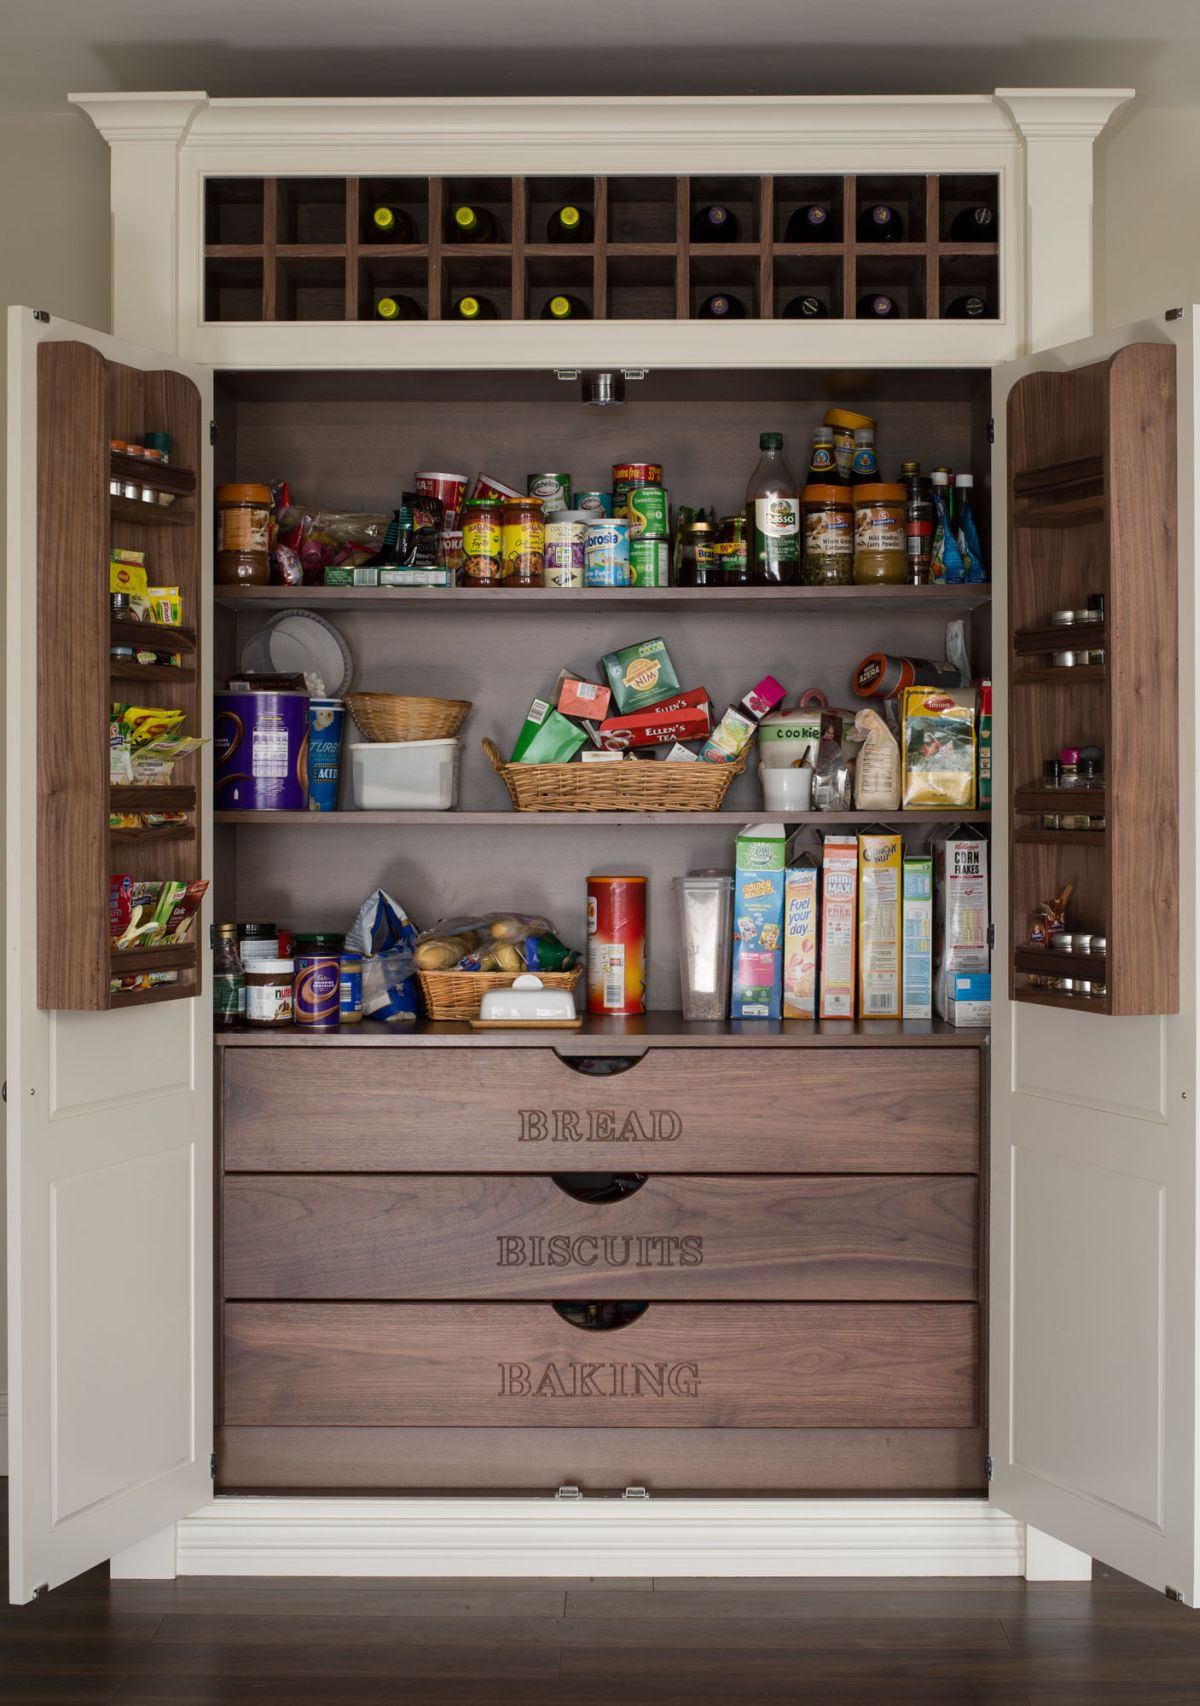 Pantry Ideas For Small Kitchens
 15 Kitchen Pantry Ideas With Form And Function